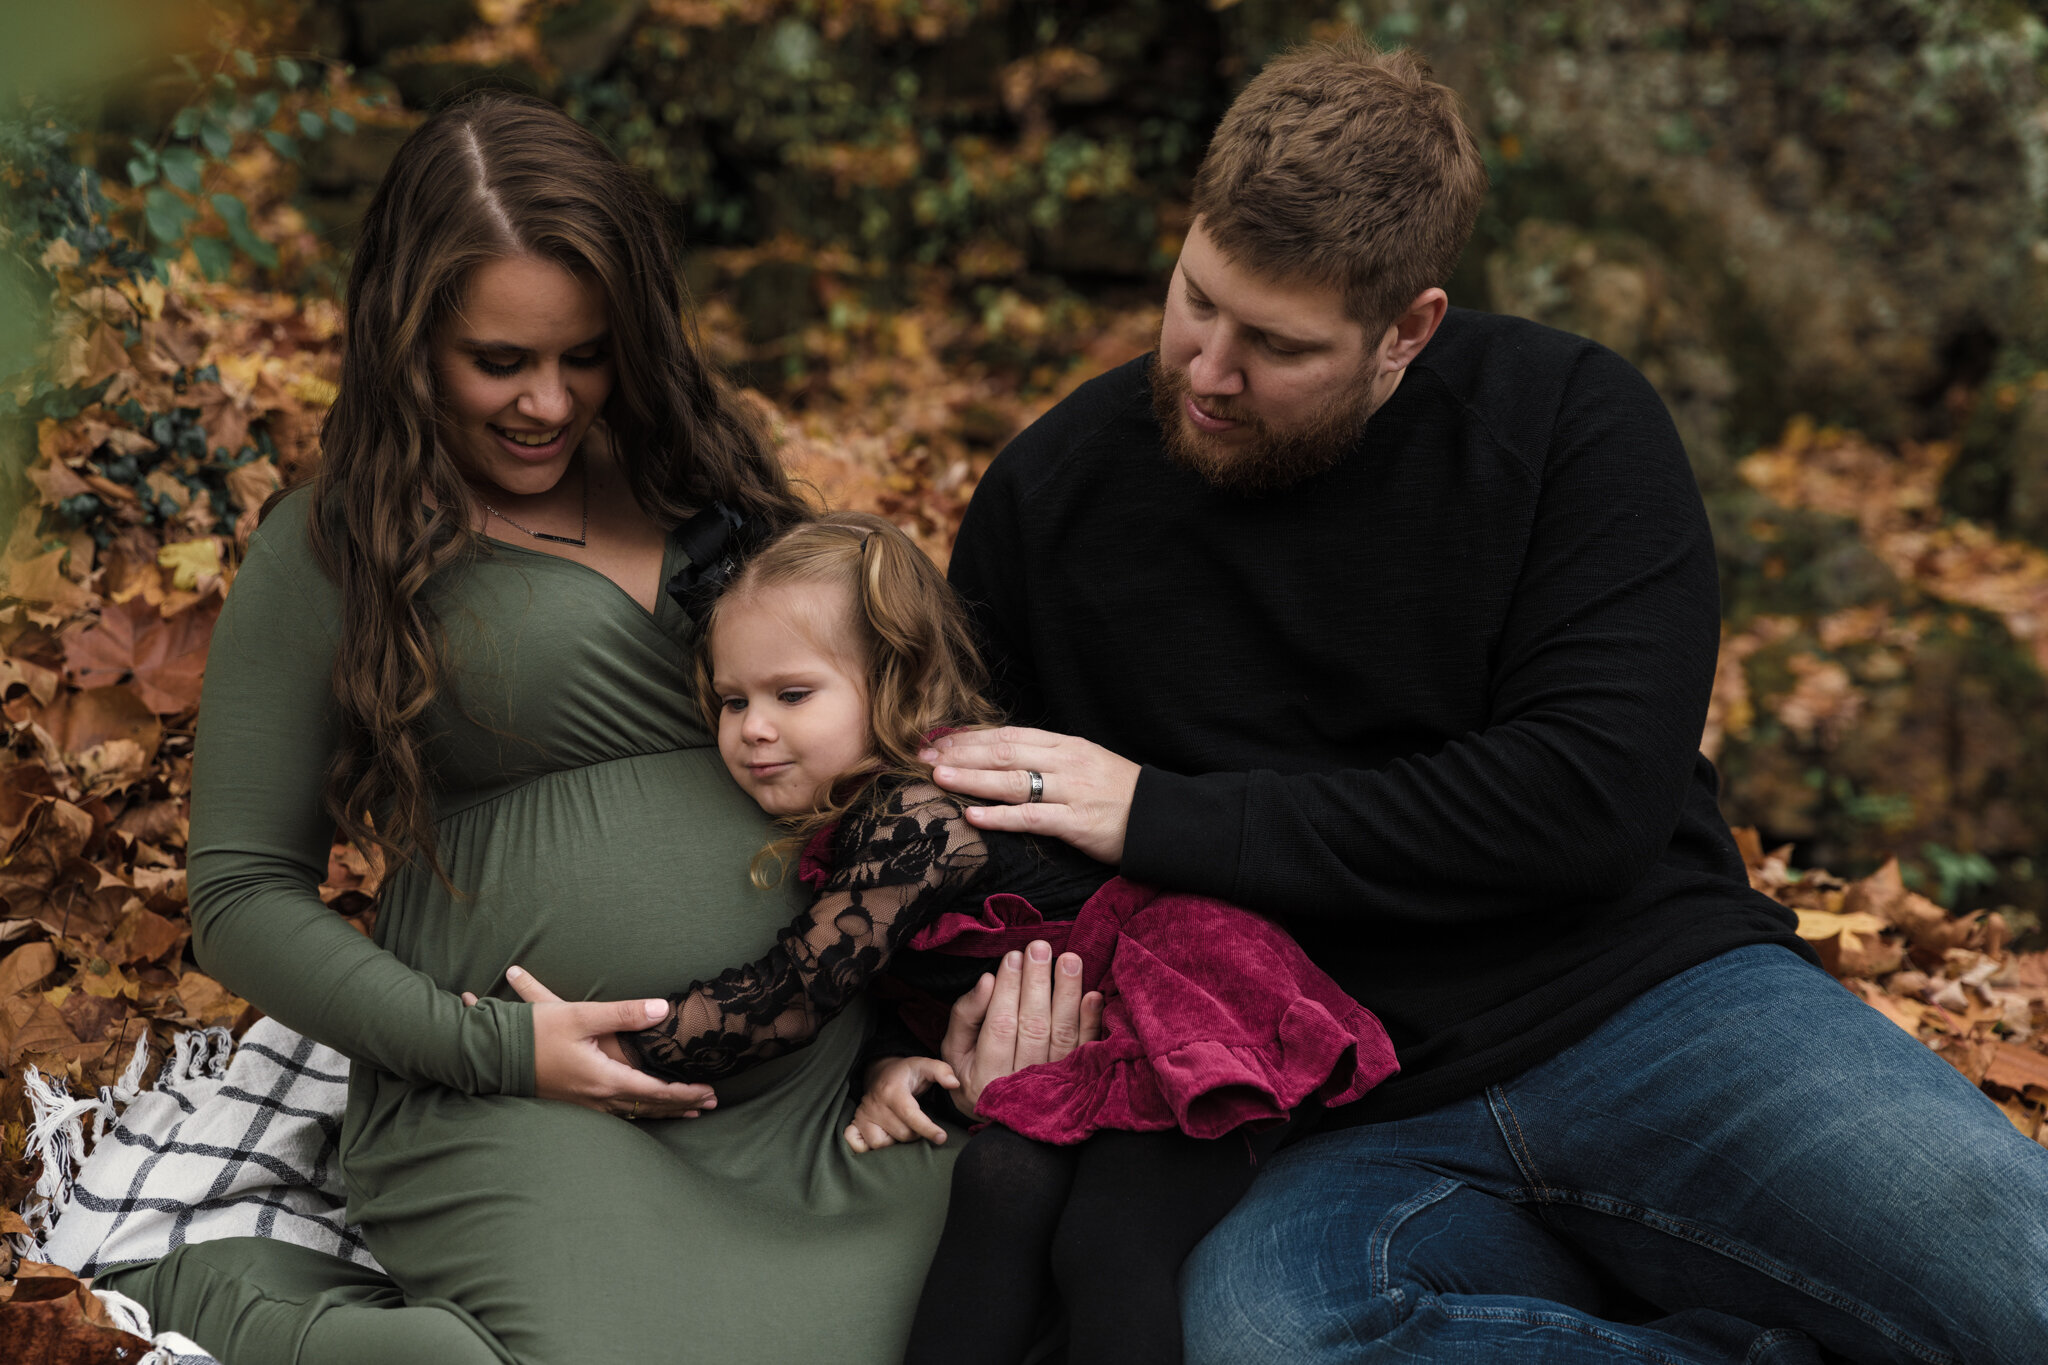 Mill_Creek_Park_Maternity_Session_Jewel_Tone_Fall_Colors_Family_of_Three_Big_Sister_Little_Brother_Maternity_Session_by_Baby_and_Family_Photographer_Christie_Leigh_Photo_in_Mahoning_County_OH-9.JPG